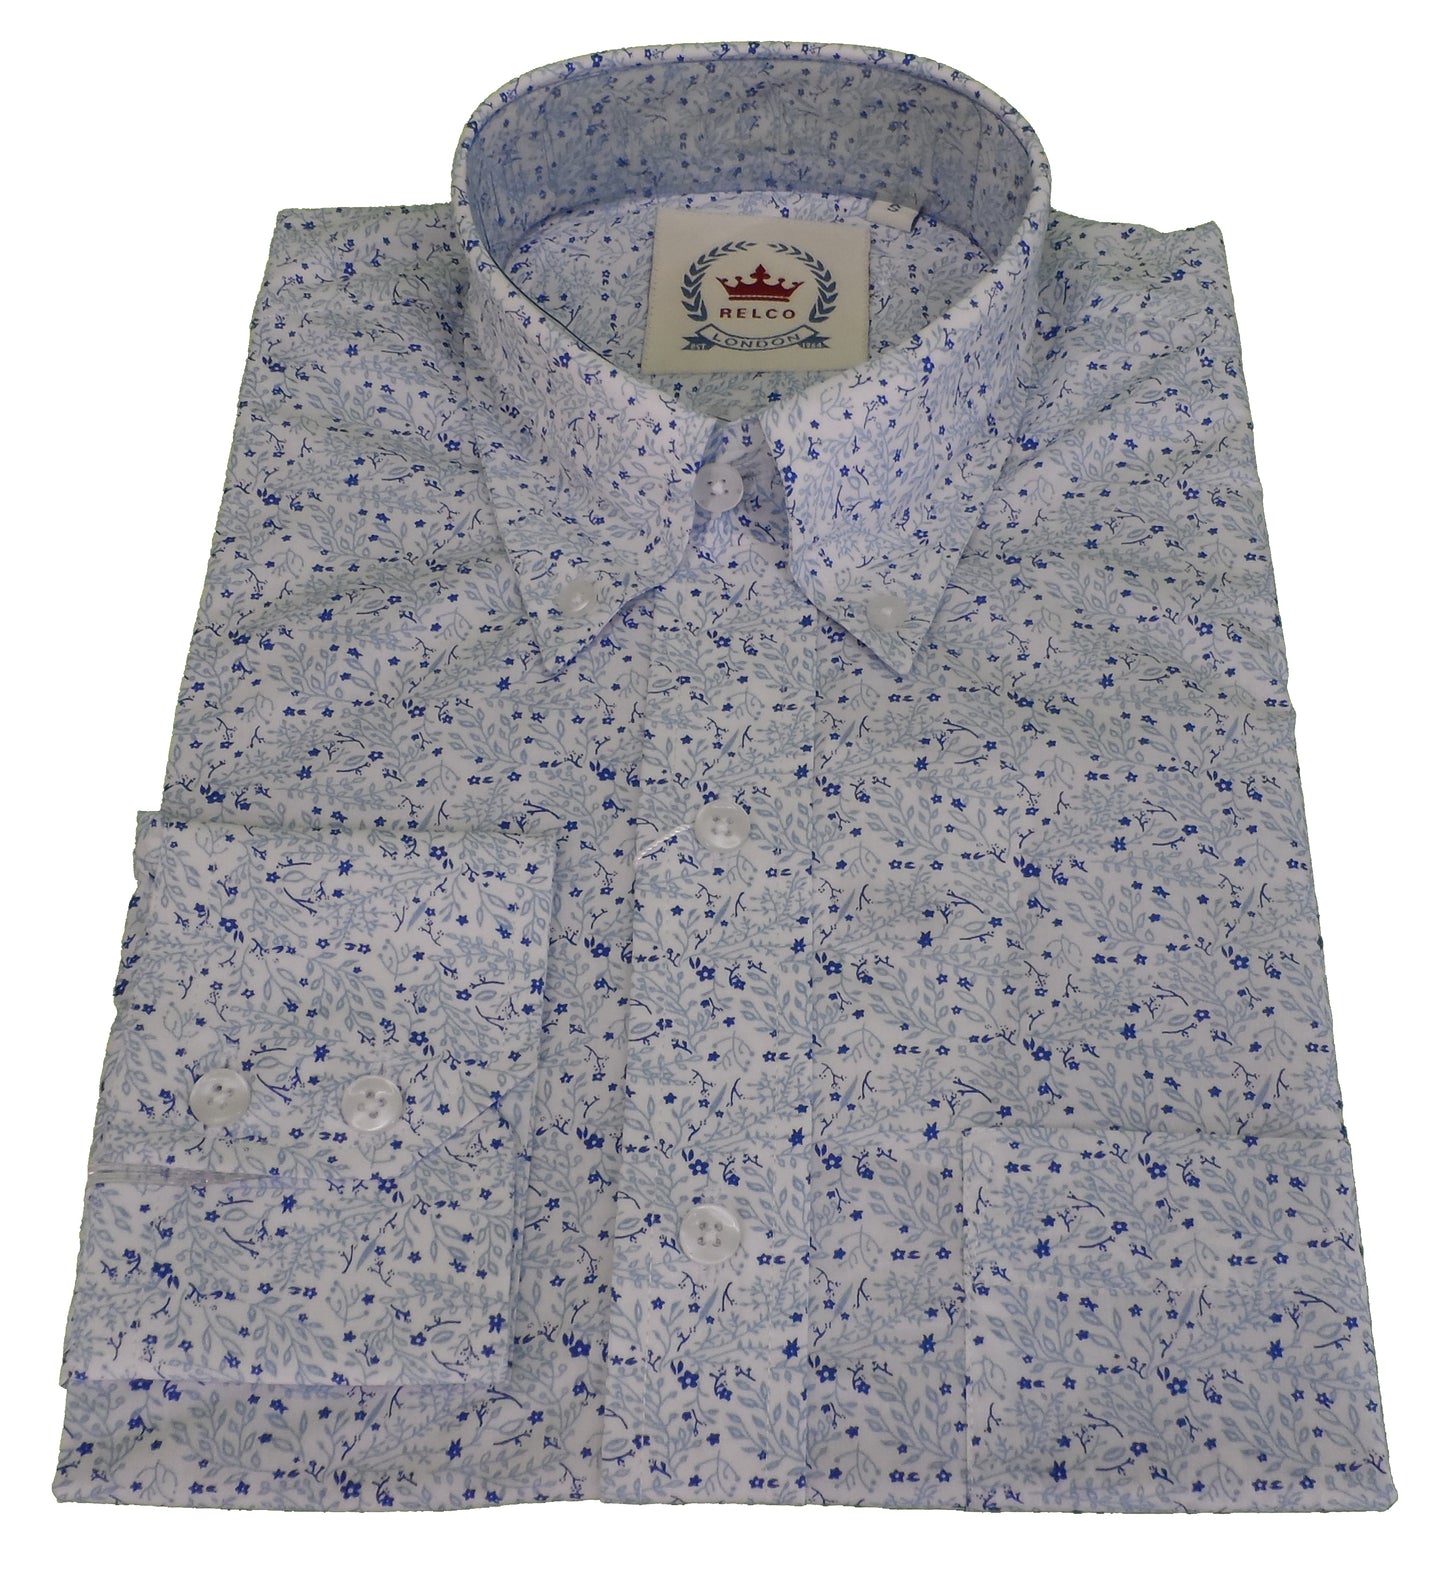 Relco White Floral Cotton Long Sleeved Button Down Shirts